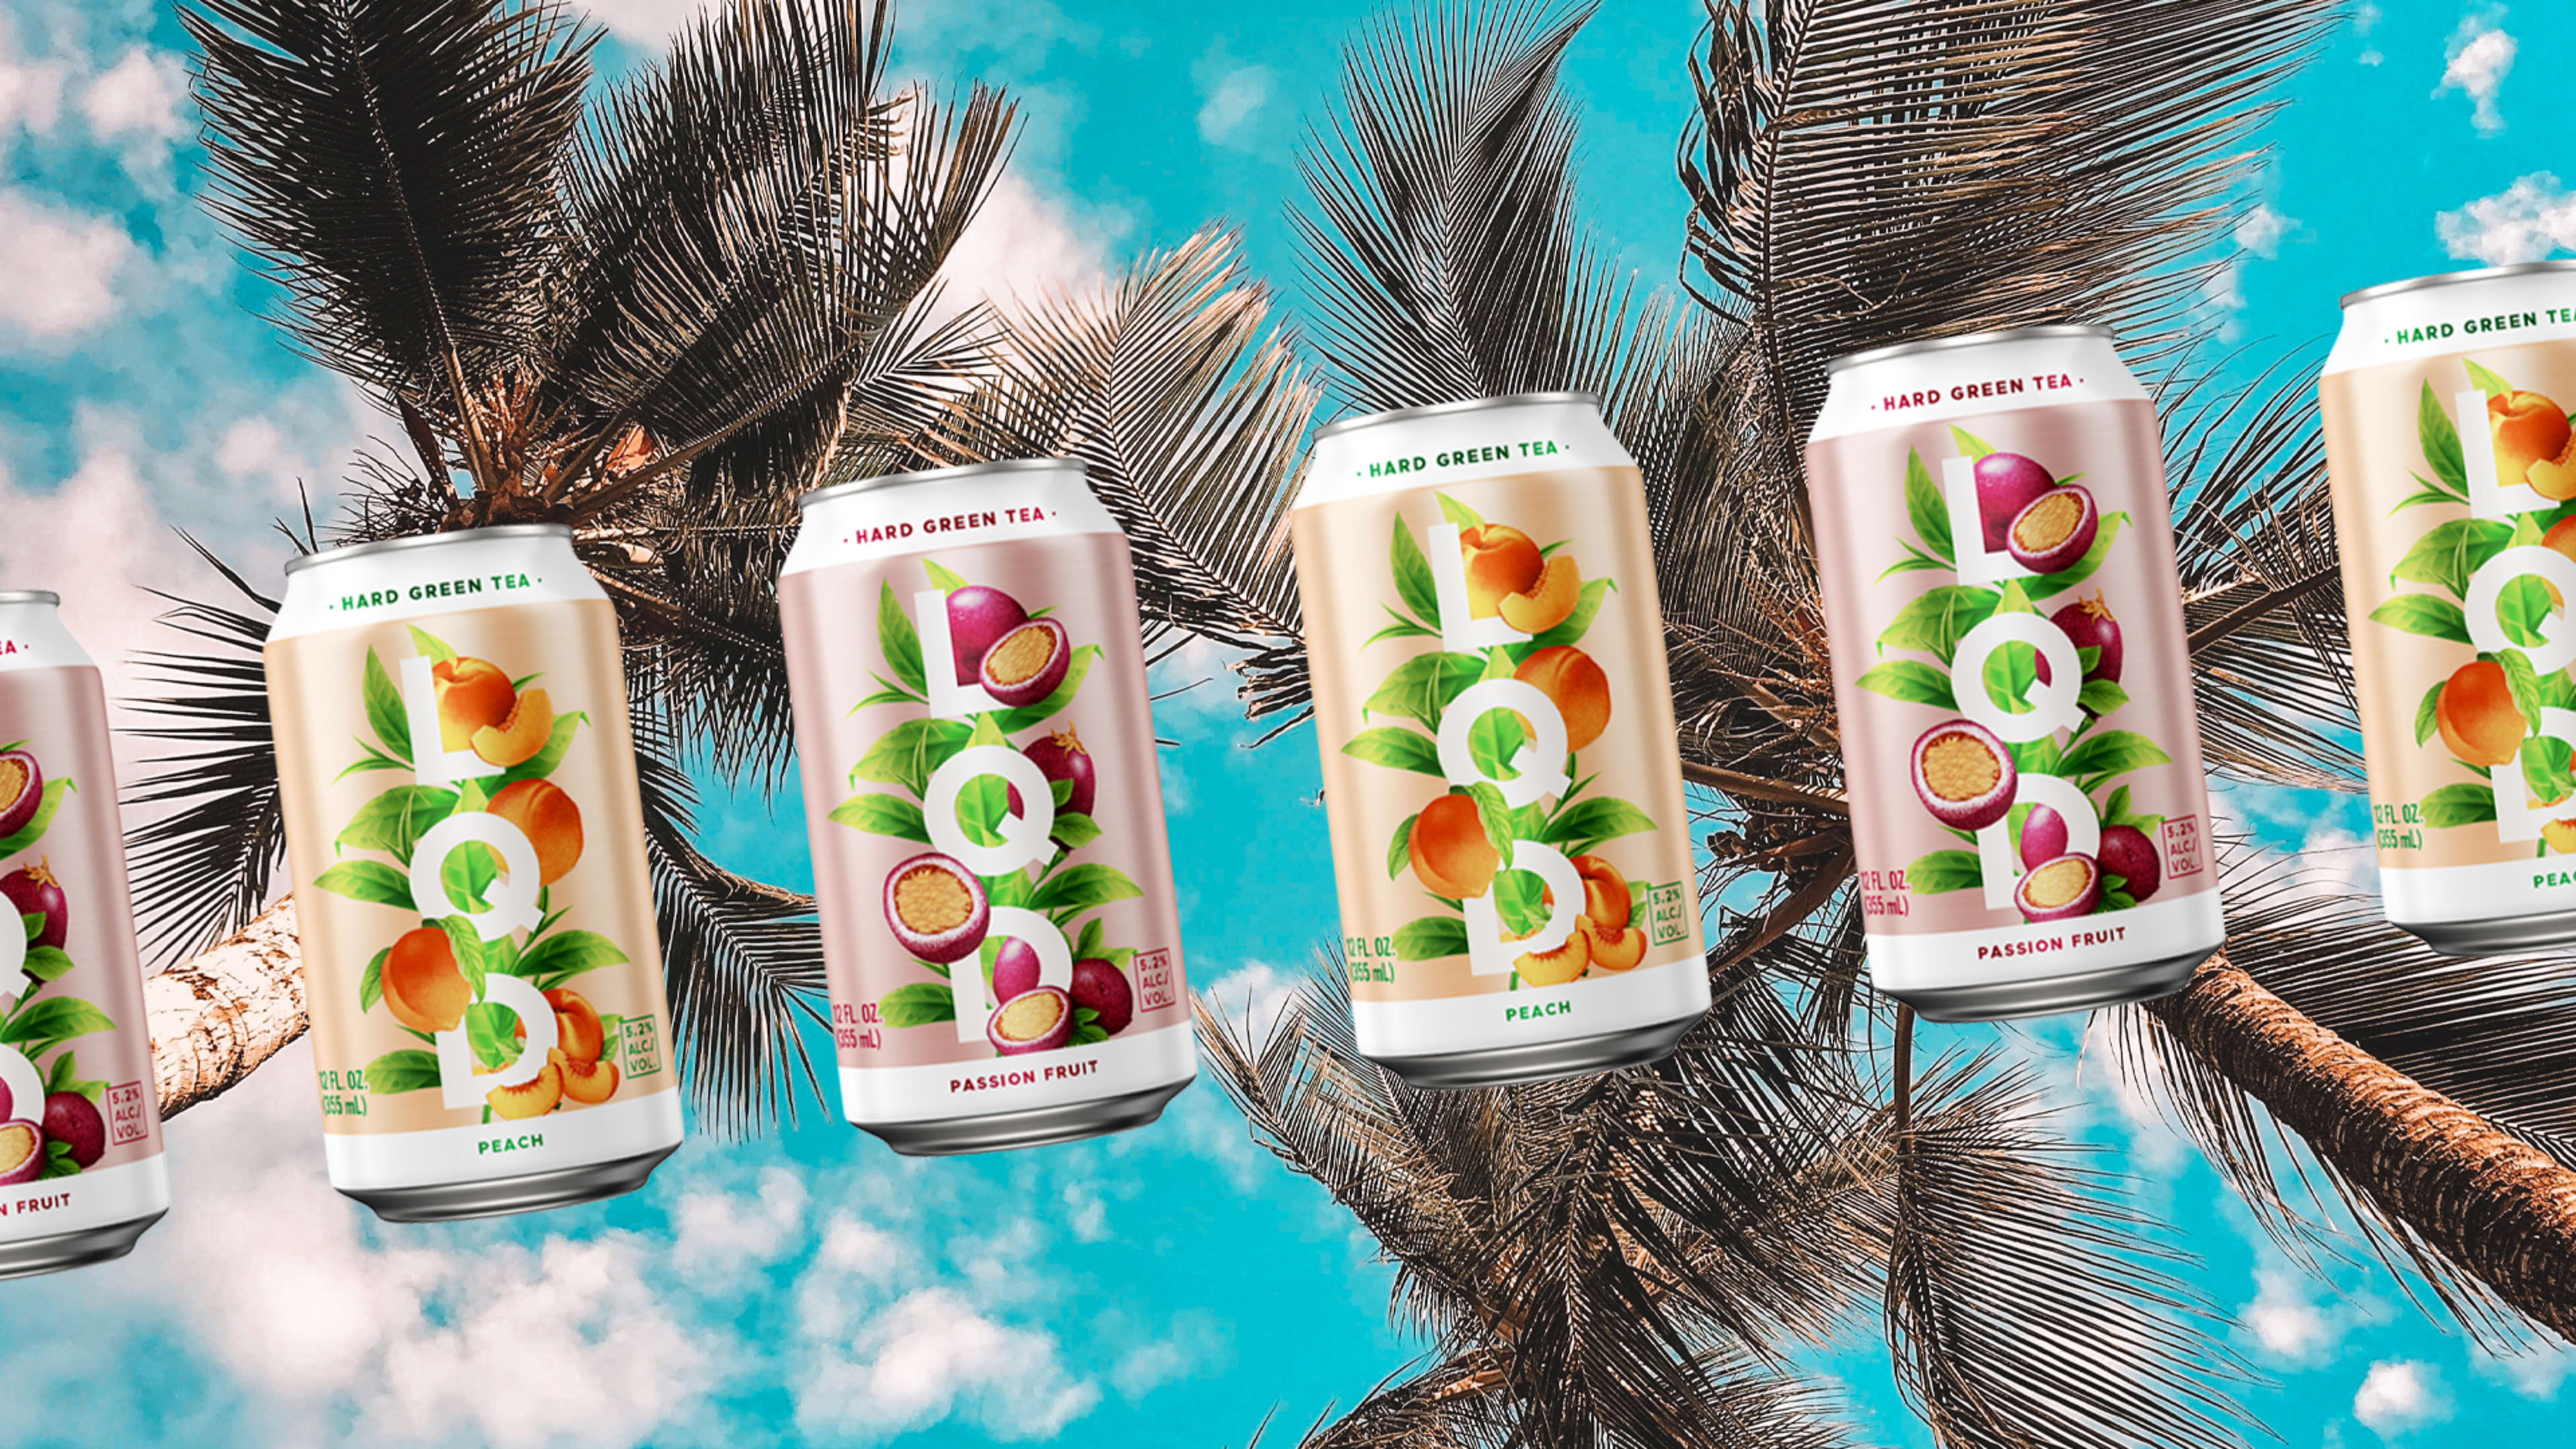 Uh-oh. Anheuser-Busch just launched a hard green tea and hard coconut water